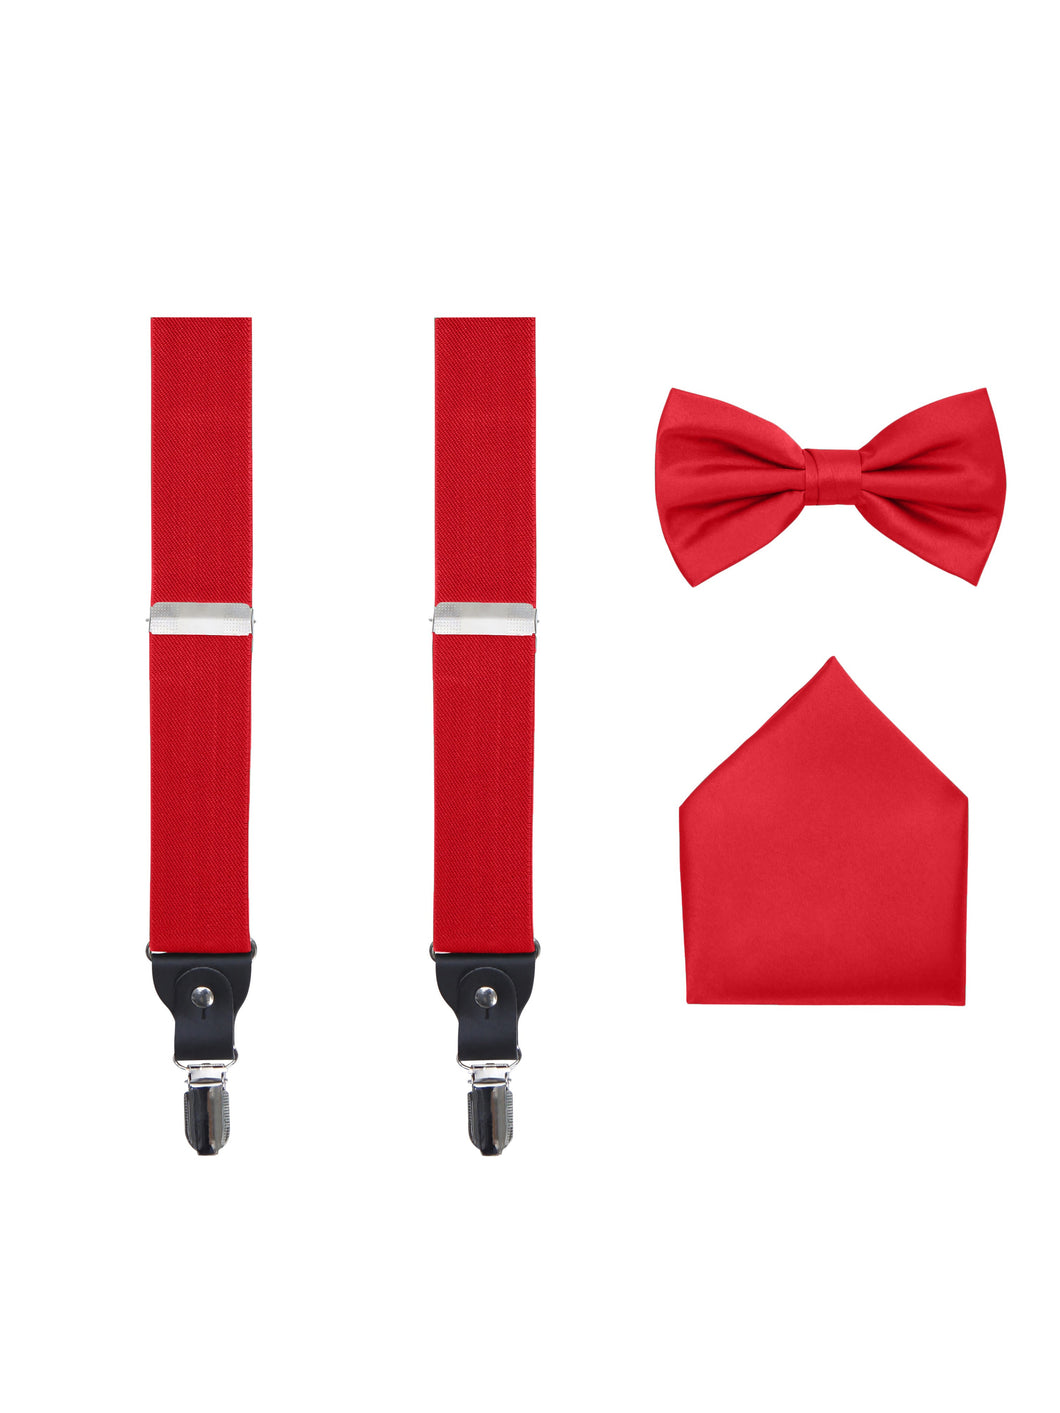 S.H. Churchill & Co. Men's 3 Piece Red Suspender Set - Includes Suspenders, Matching Bow Tie, Pocket Hanky and Gift Box